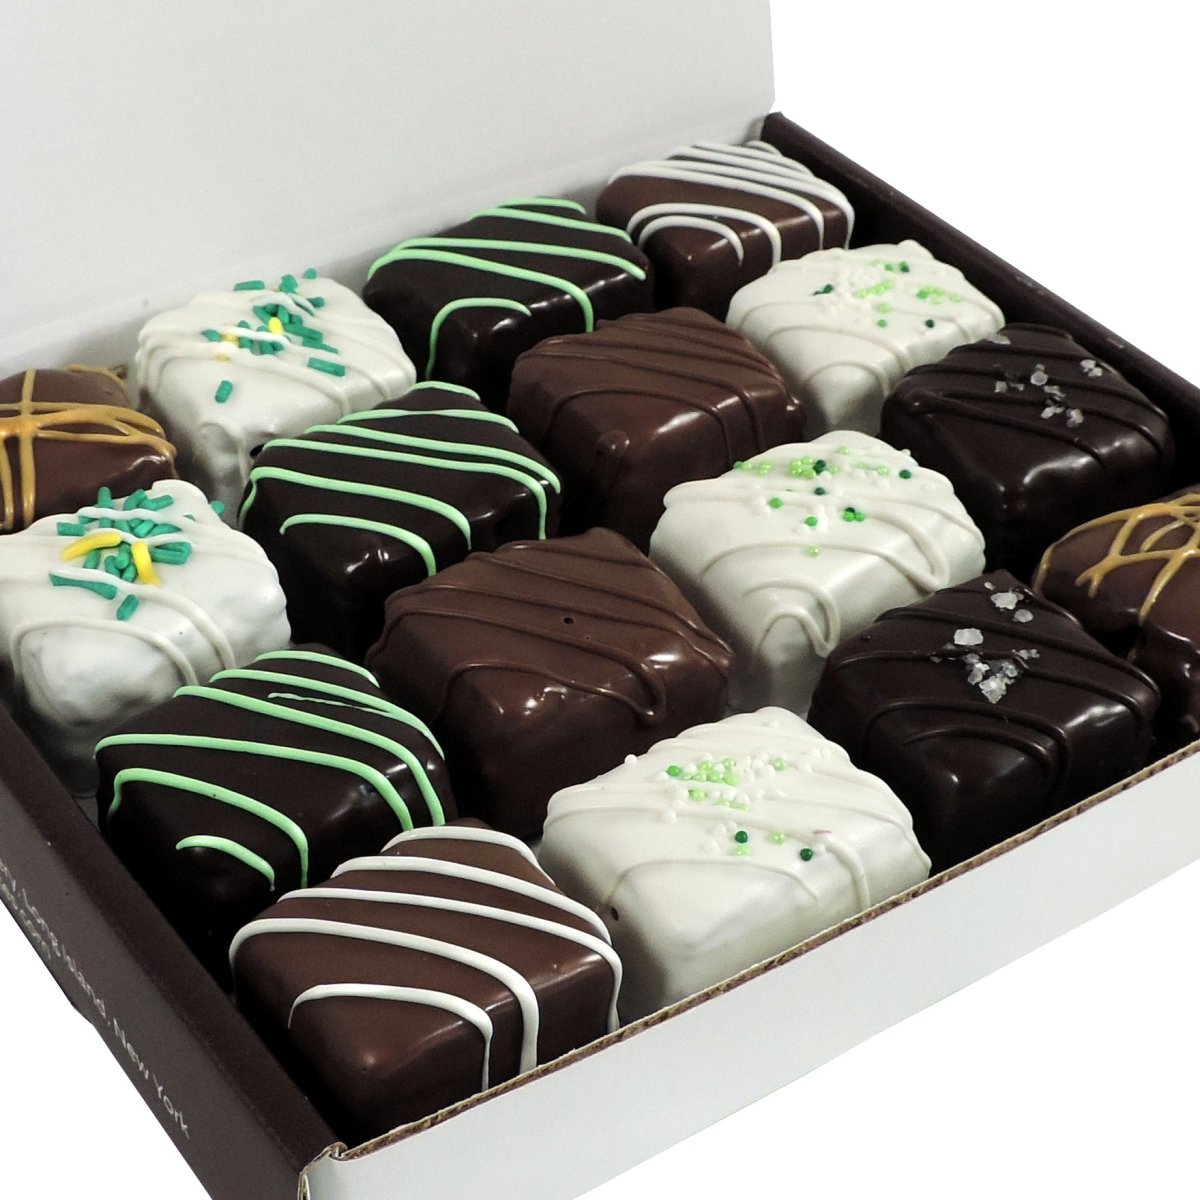 The St. Patrick's Day Box - Nettie's Craft Brownies